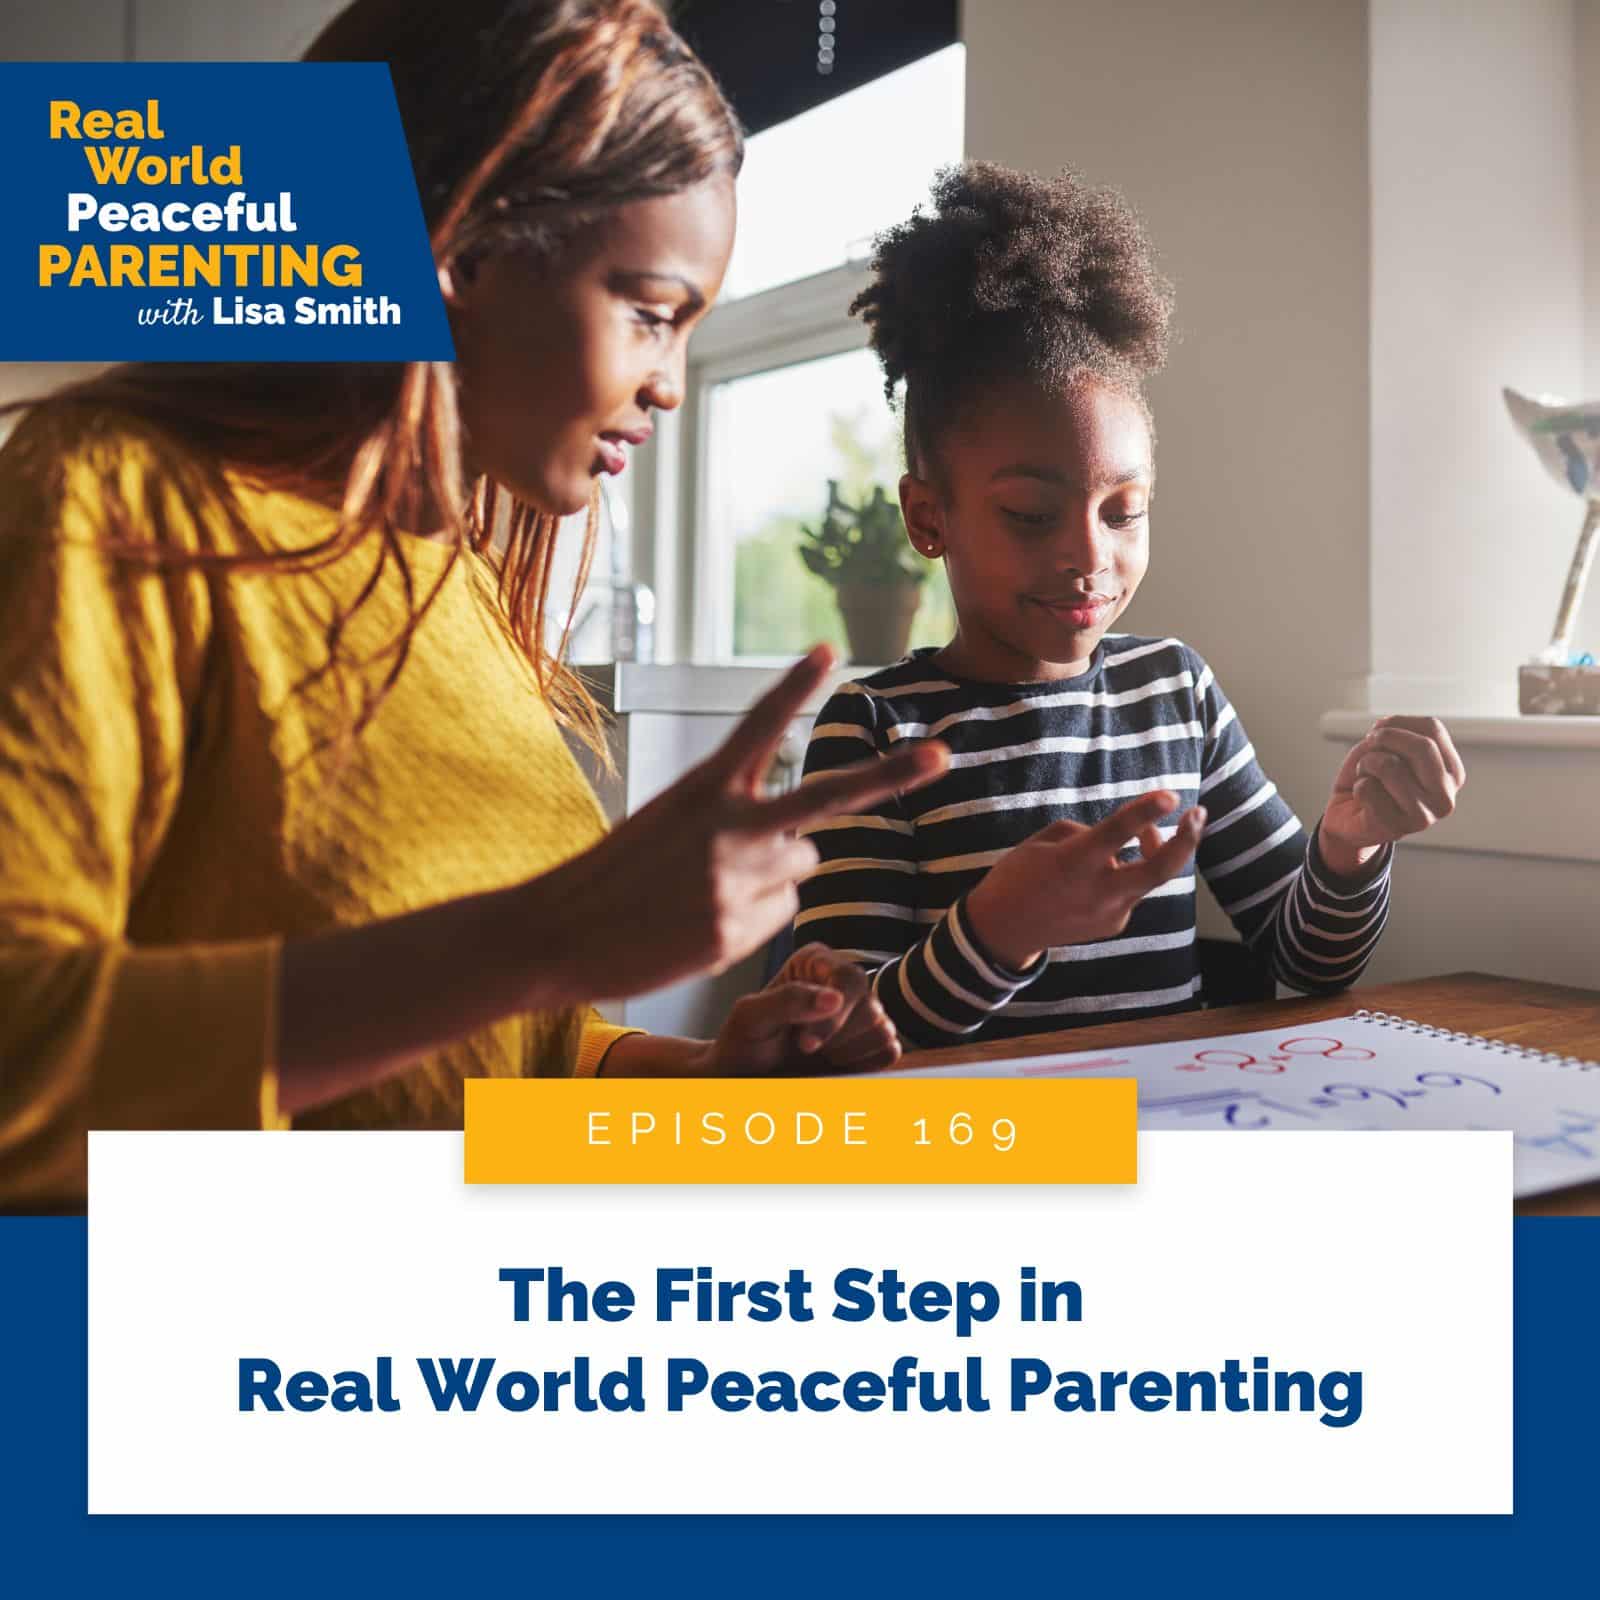 Real World Peaceful Parenting with Lisa Smith | The First Step in Real World Peaceful Parenting